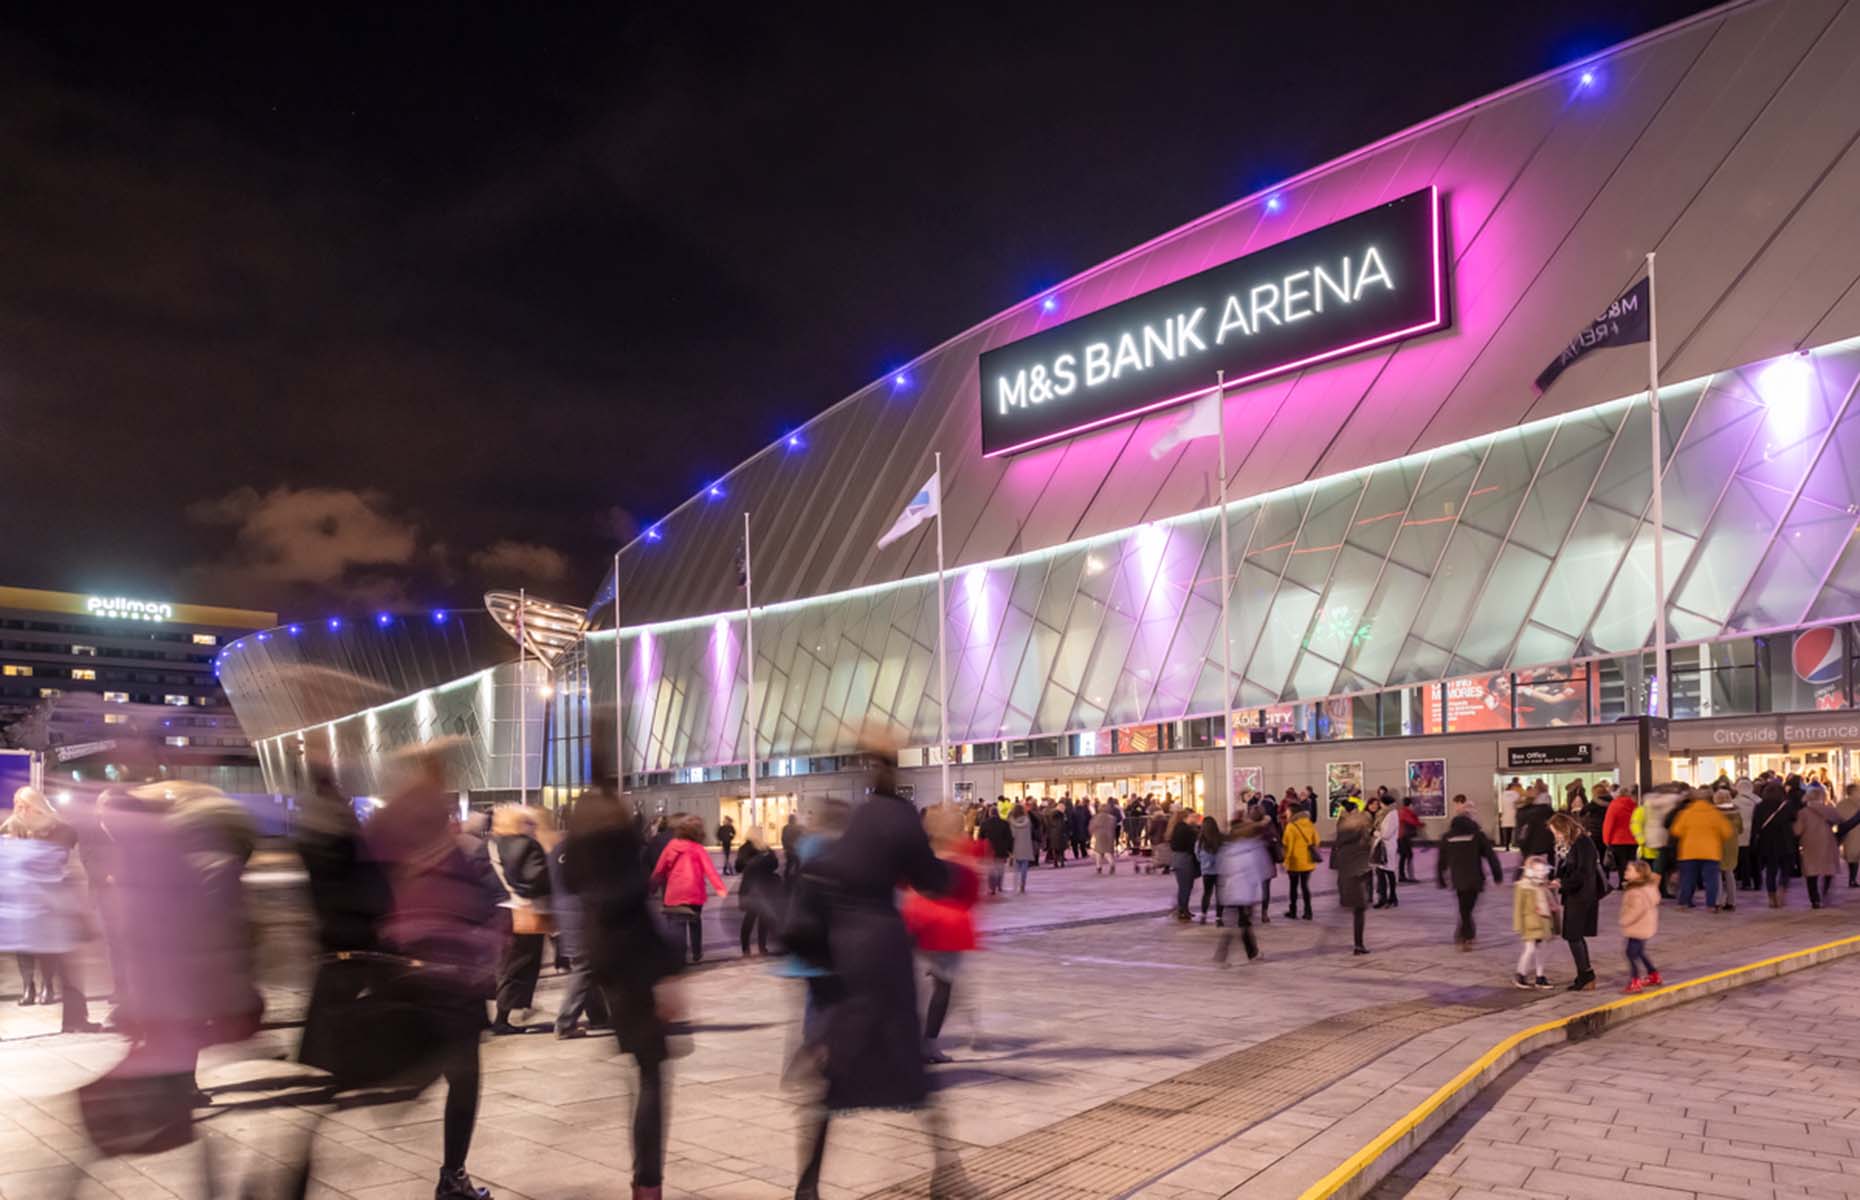 M&S Bank Arena in Liverpool (Image: Visit Liverpool)